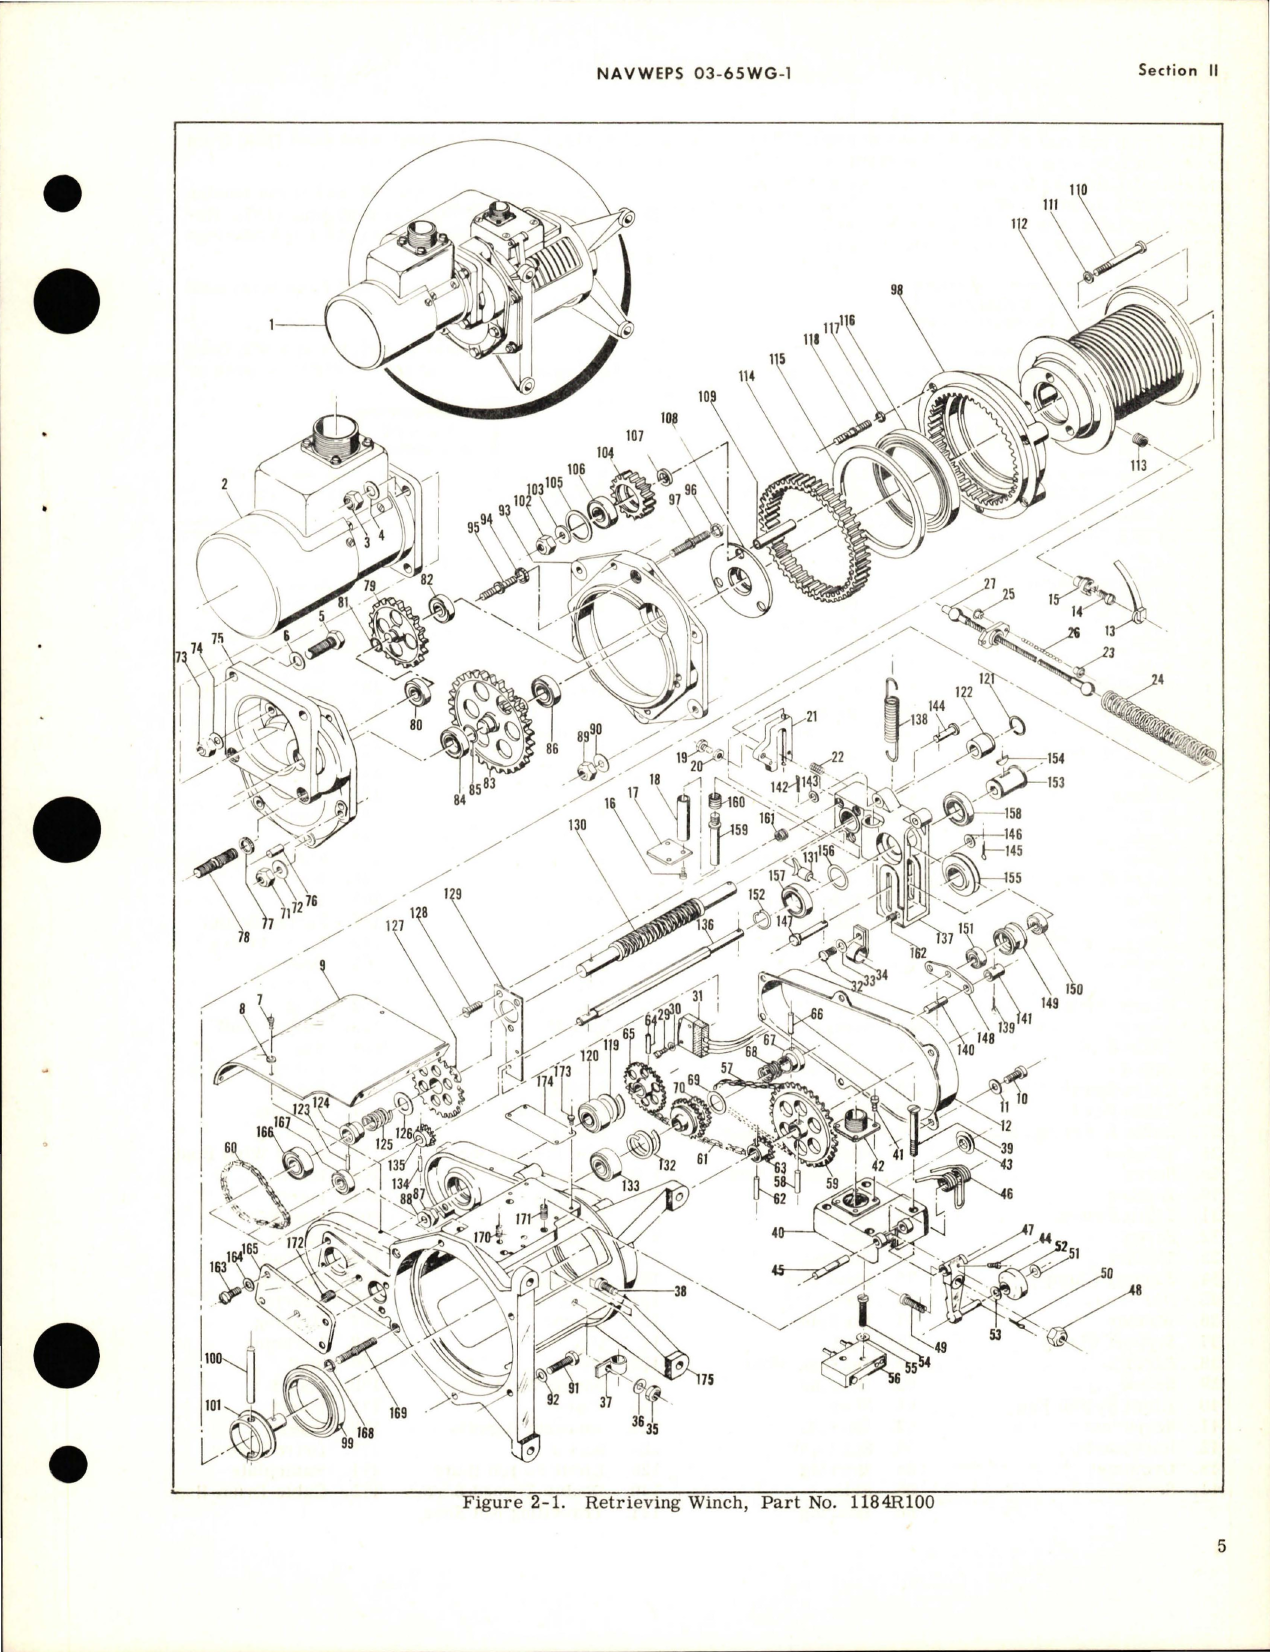 Sample page 7 from AirCorps Library document: Overhaul Instructions for Retrieving Winch - Parts 1184R100